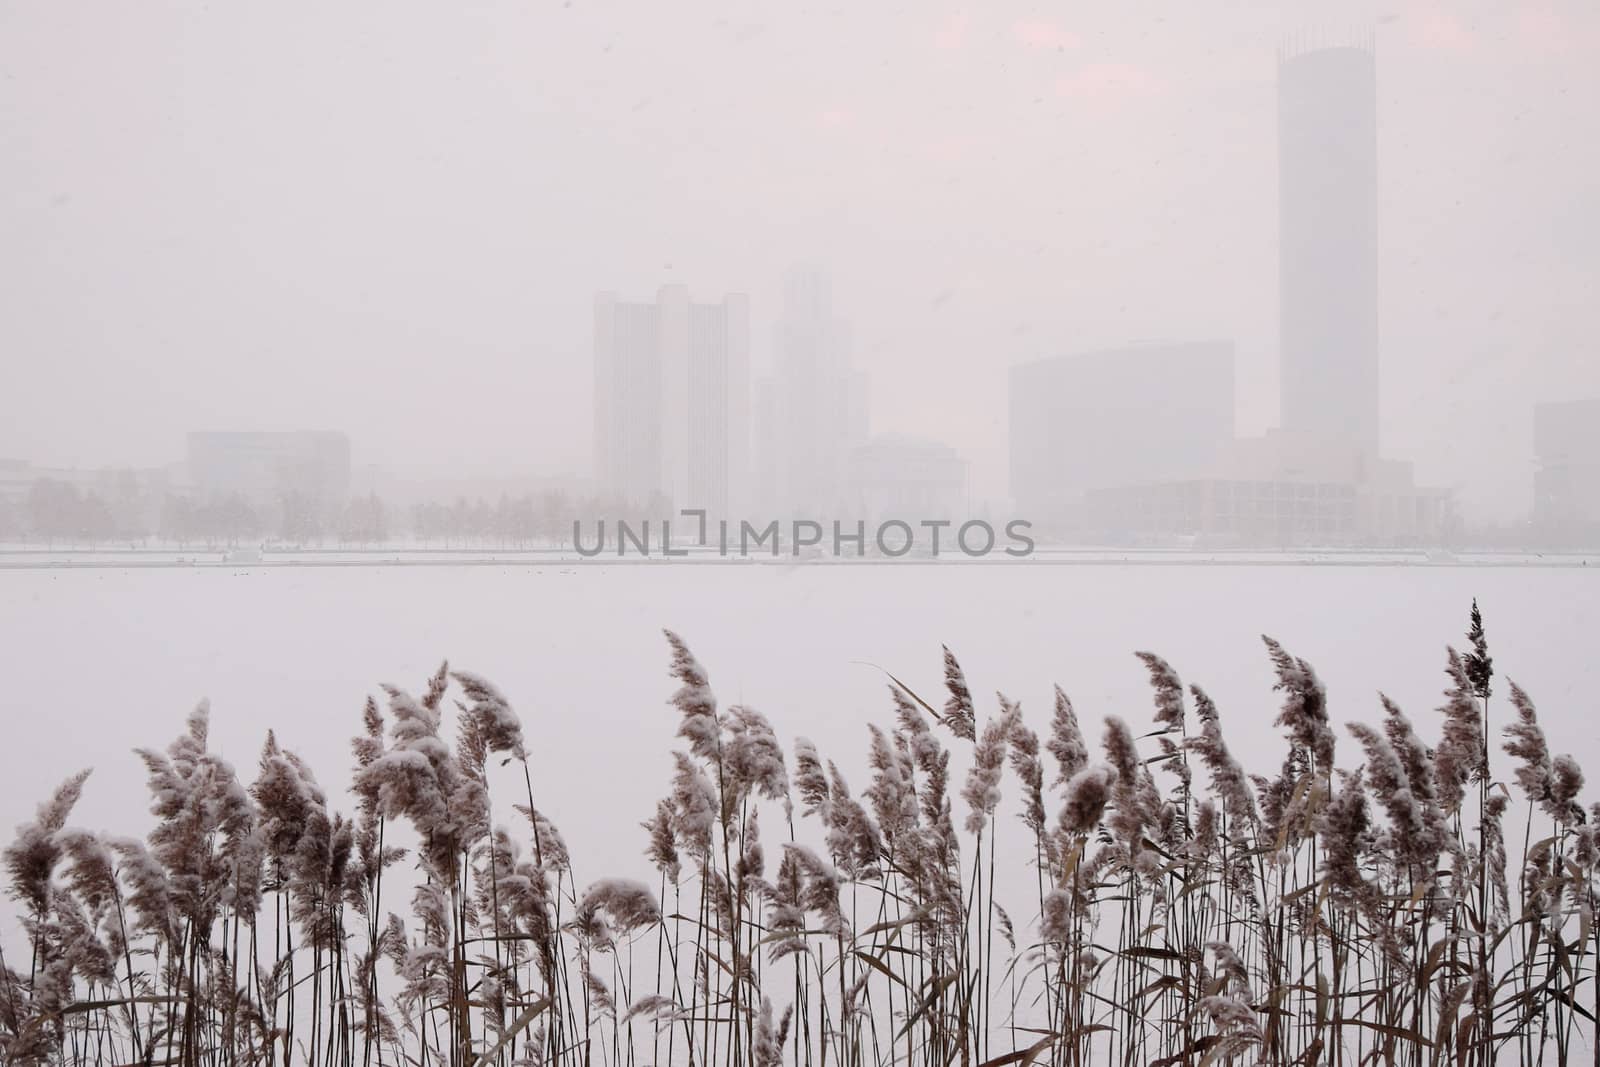 Уekaterinburg. Reed in the snow on the bank of a city pond with silhouettes of houses